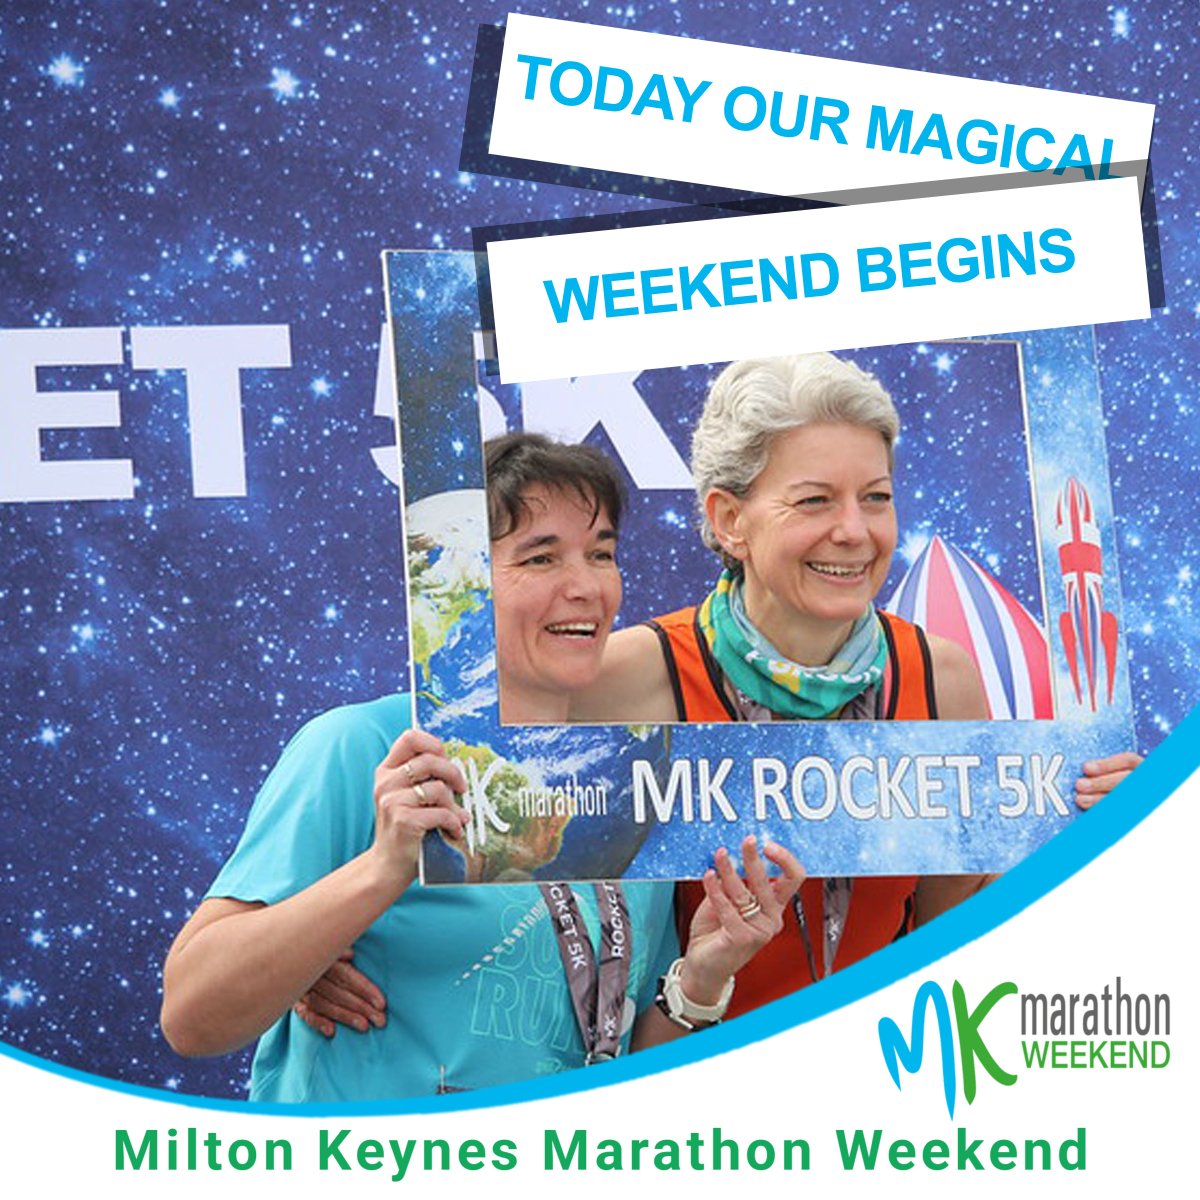 Today is the start of our magical weekend!✨ Starting the day off with the Rocket 5k 🚀 Start Time: 09:00 Event Village: Midsummer Boulevard, Milton Keynes Course Time Limit: 45 minutes🏃‍♂️🏃‍♀️ For more information, please check our race guides 👇 mkmarathon.com/event-guide/